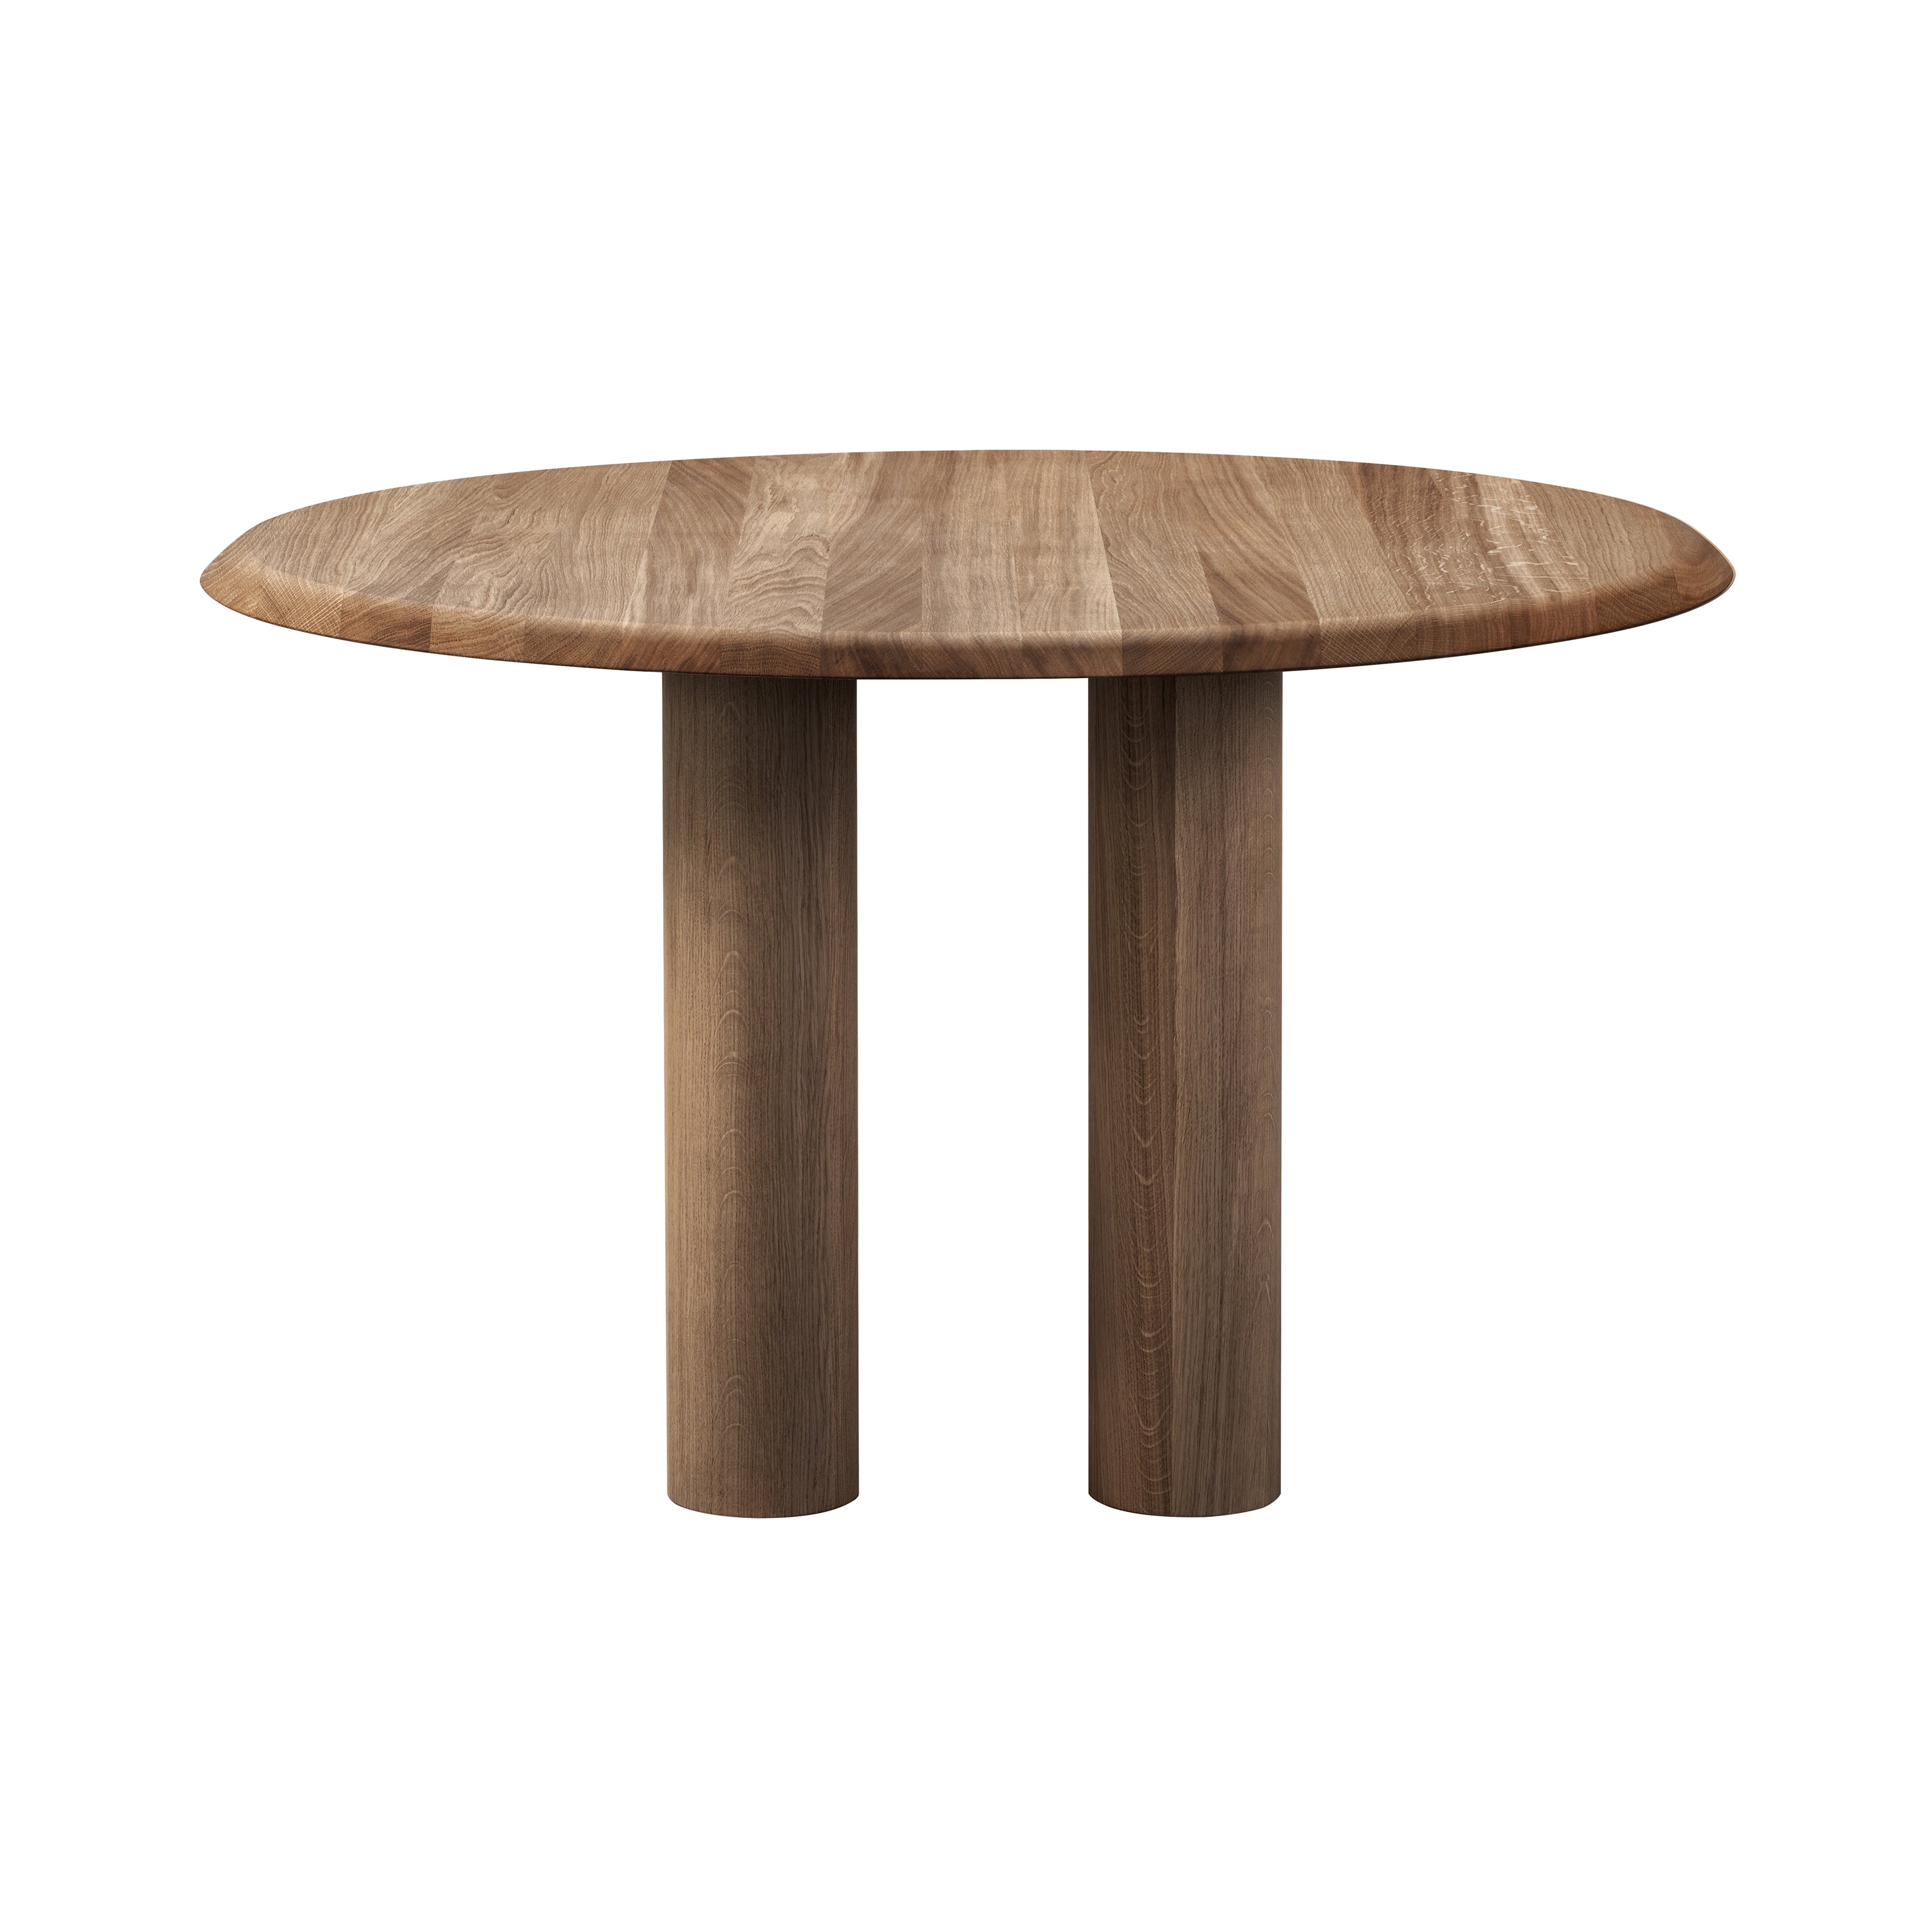 Islets Dining Table: Smoked Oiled Oak